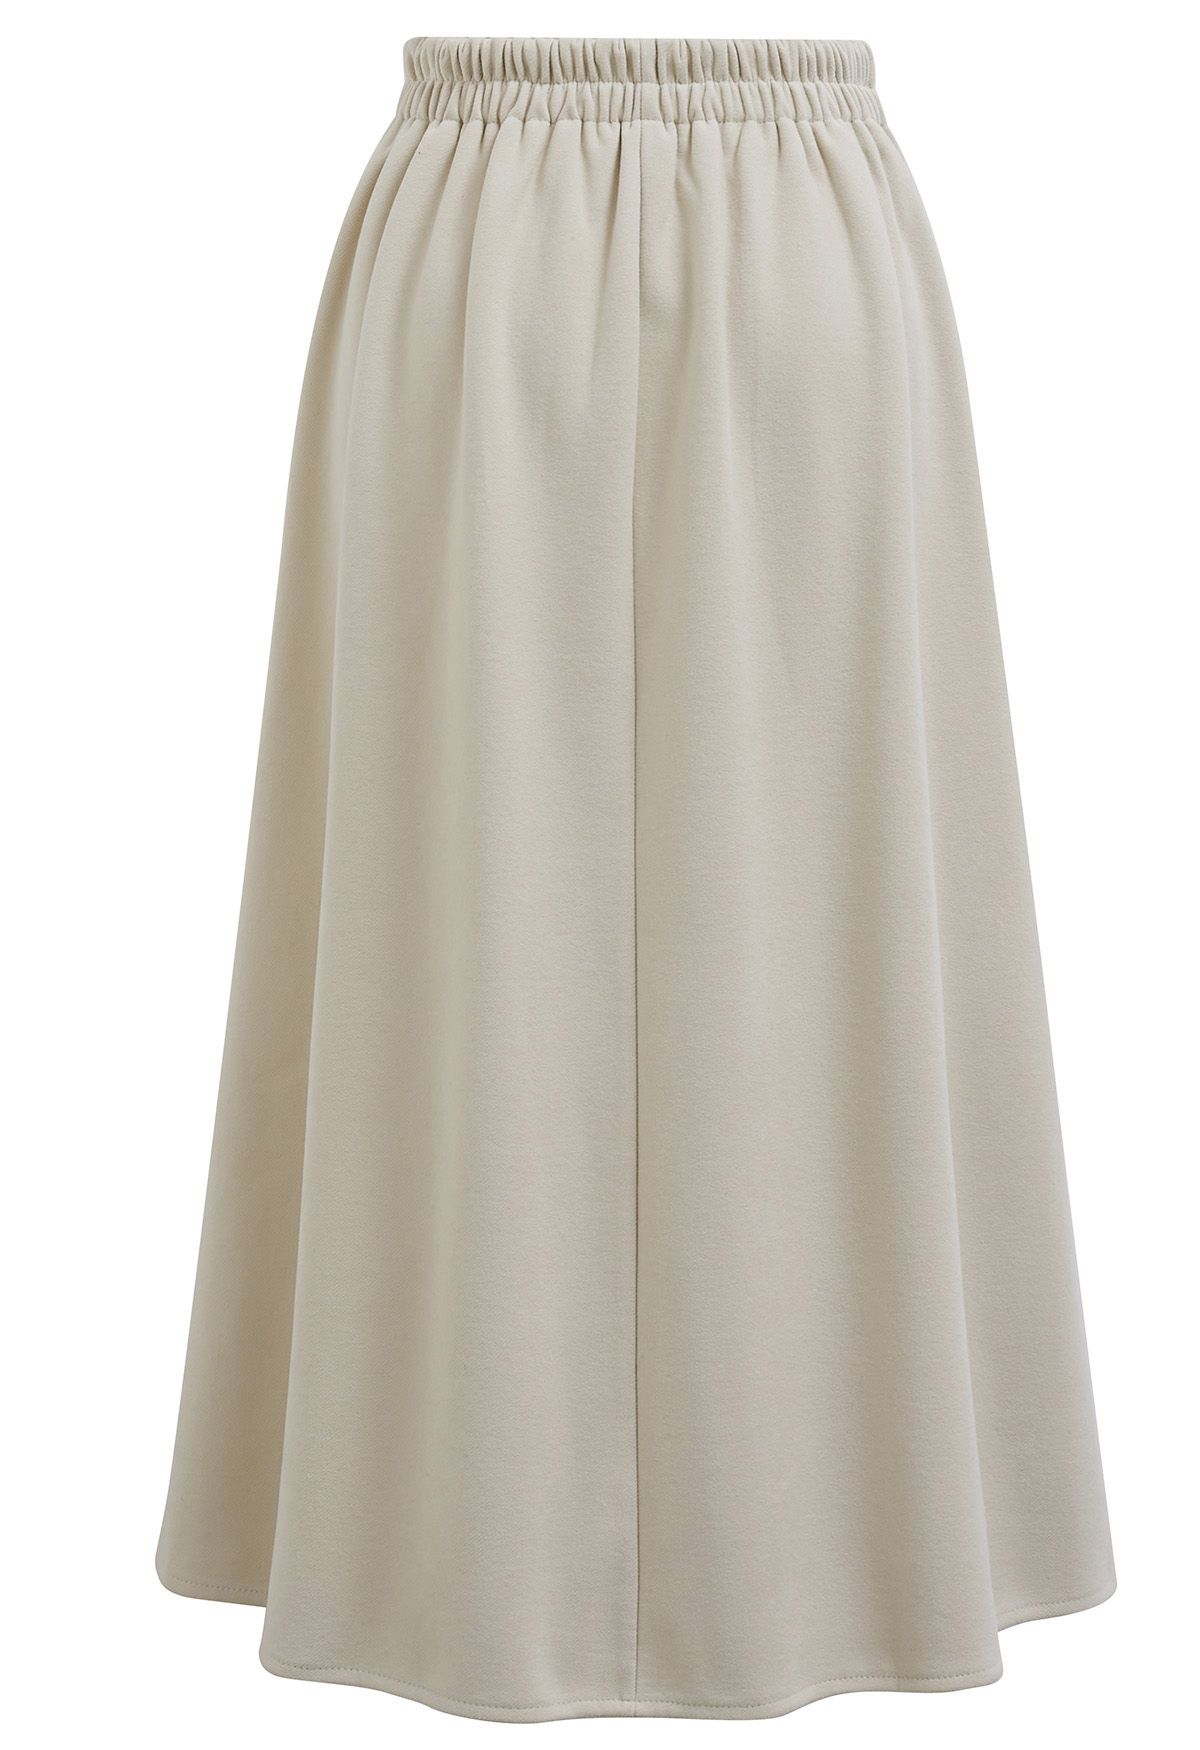 Solid Color Wool-Blend Pleated Midi Skirt in Ivory - Retro, Indie and ...